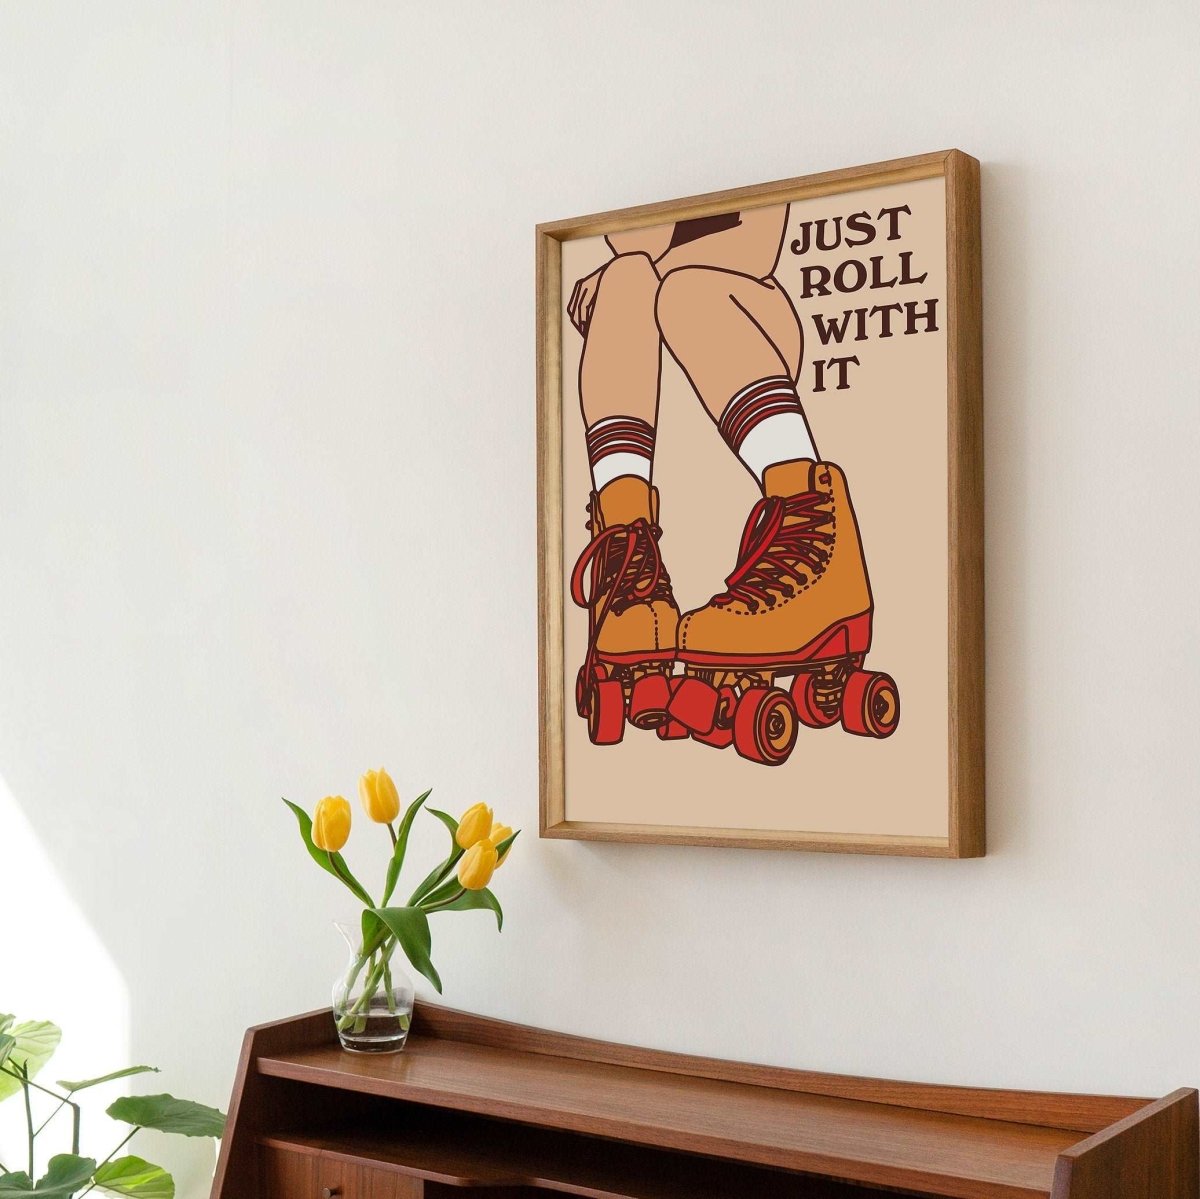 'Just Roll With It' Retro Rollerblades Print - Art Prints - Kinder Planet Company